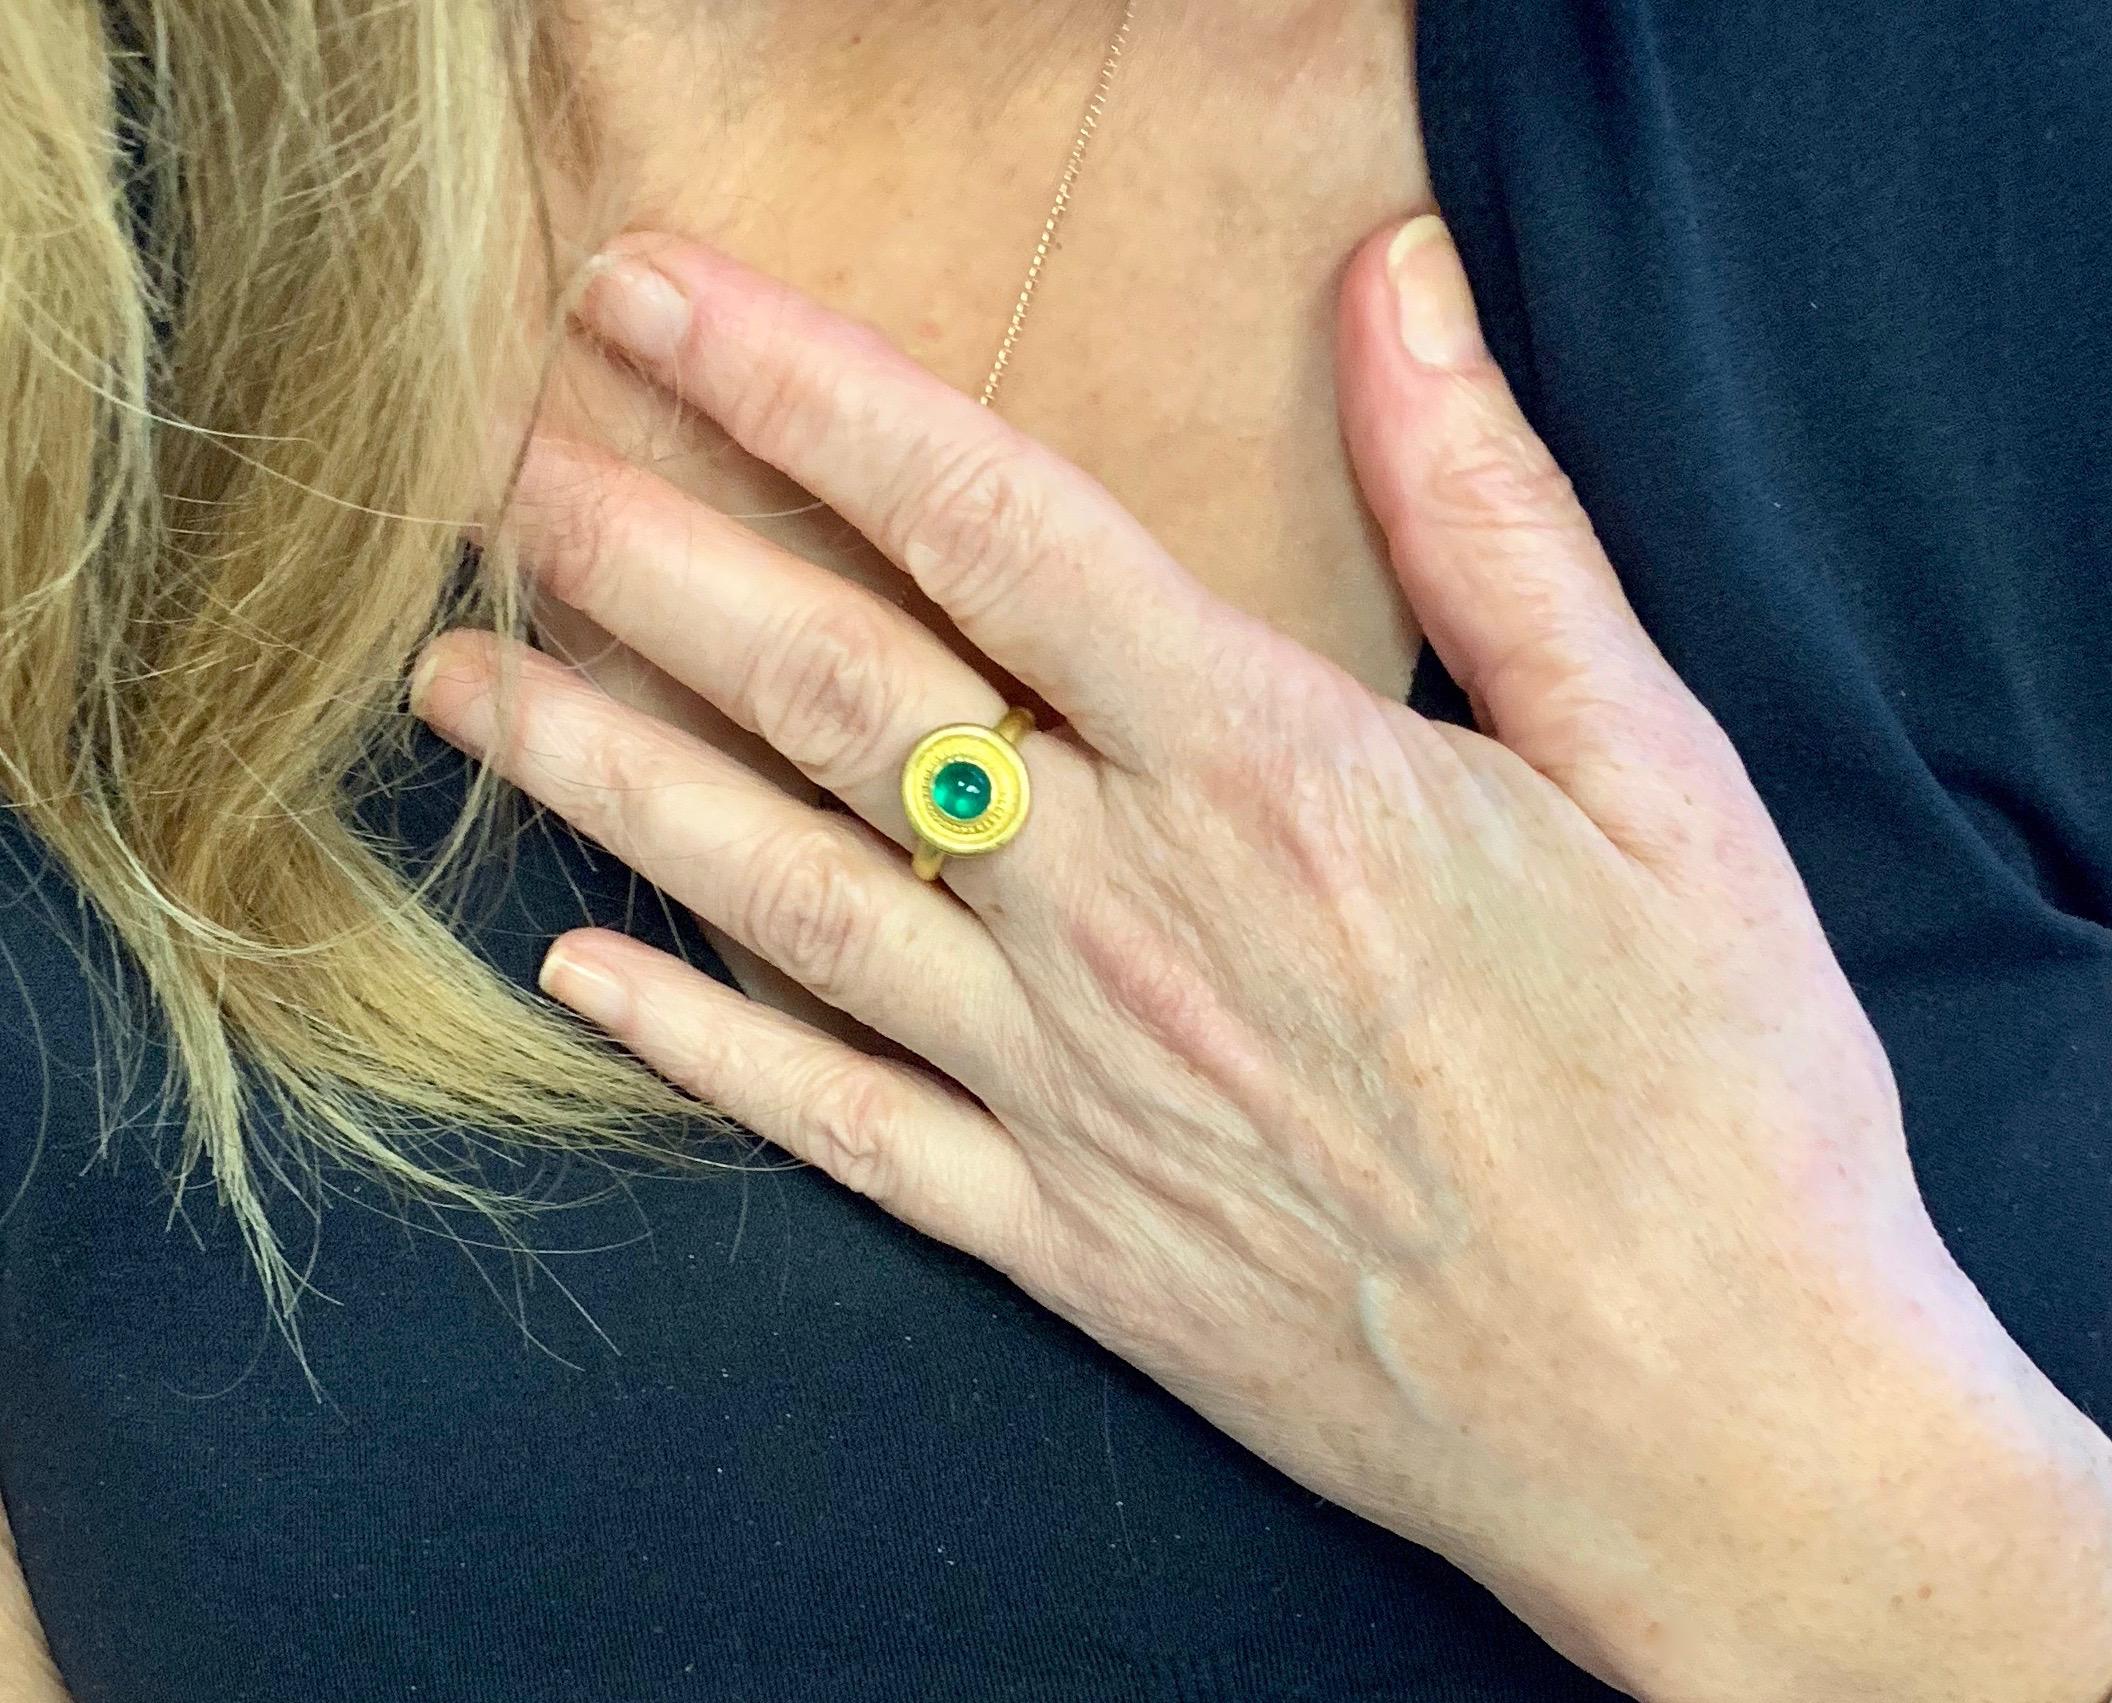 Oval cabochon Emerald ring,  granulation in 22 Karat gold. 
Emerald with its fresh spring color is well suited to represent the birthstone of May.
Size 7-7.25 emerald is 1.25 carats. This ring can be resized.
One of a kind and  hand made in New York